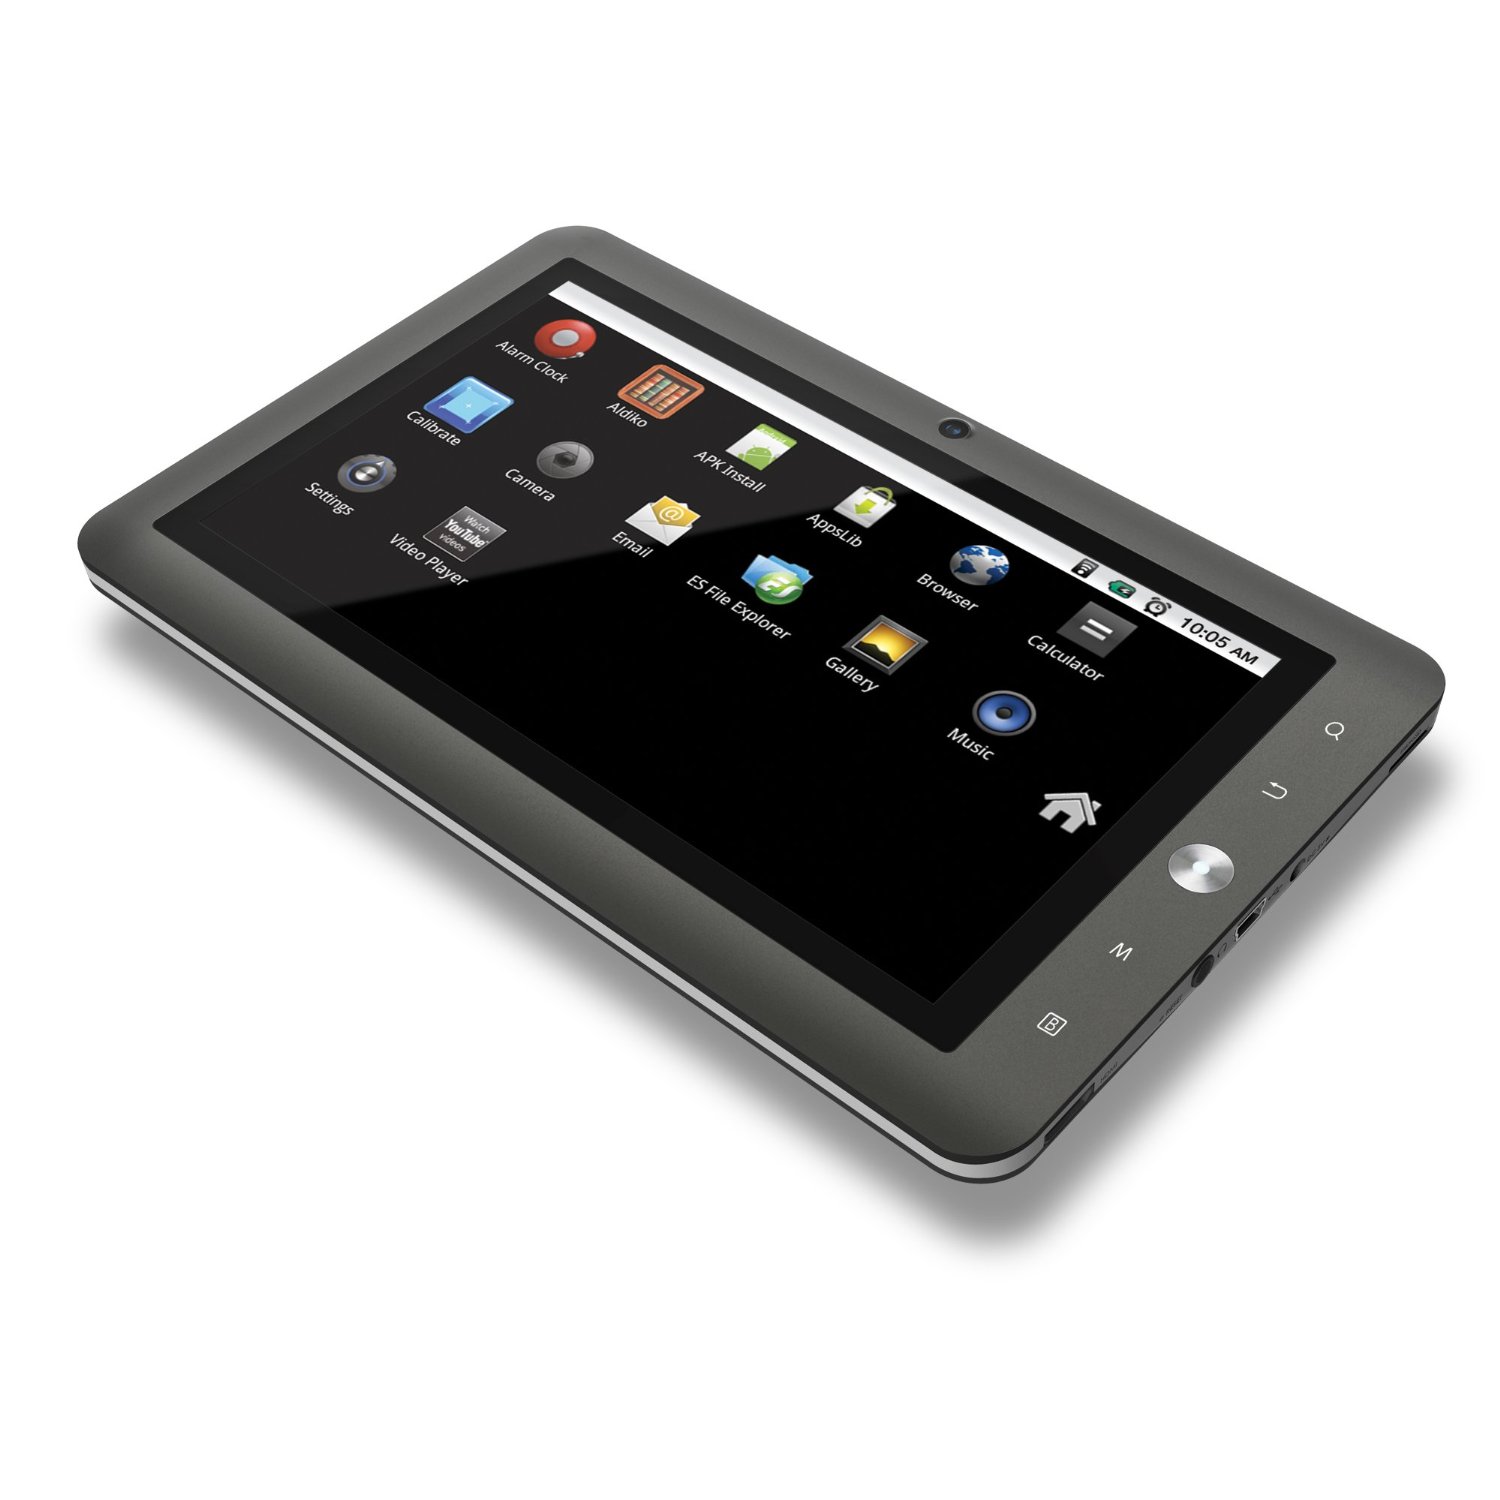 http://thetechjournal.com/wp-content/uploads/images/1108/1313981281-coby-kyros-4-gb-7inch-touchscreen-and-android-22-powered-tablet--2.jpg